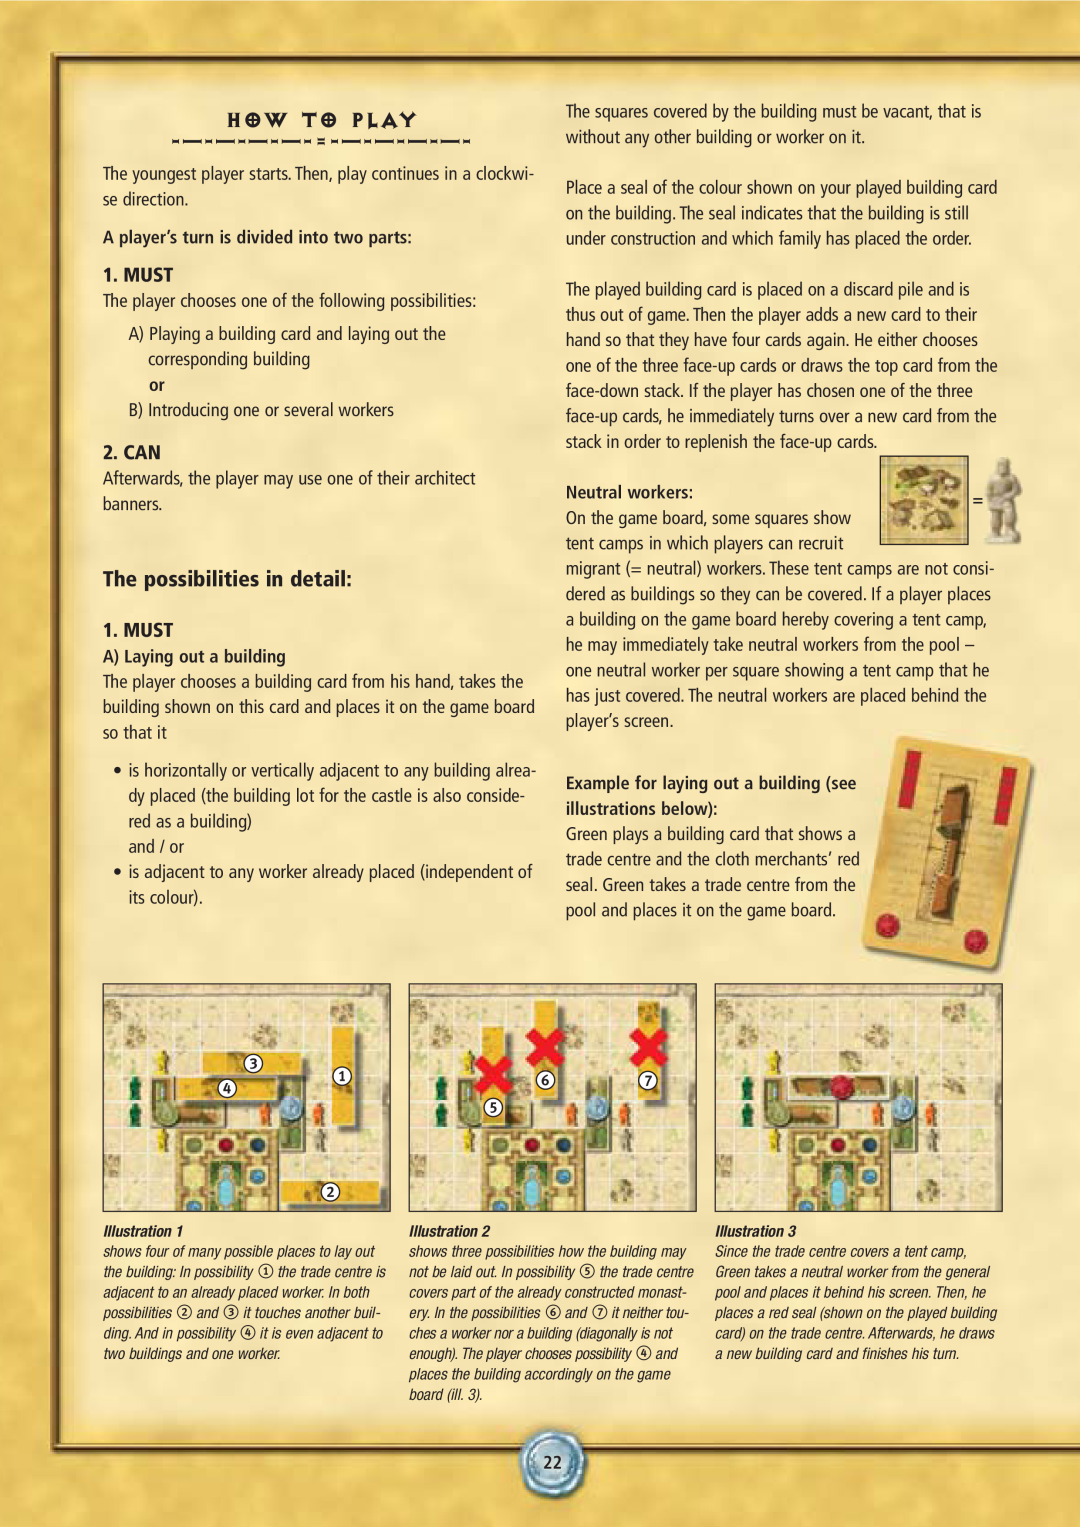 Rio Grande Games 6 manual How To Play =, The possibilities in detail, Must, Can, A player’s turn is divided into two parts 